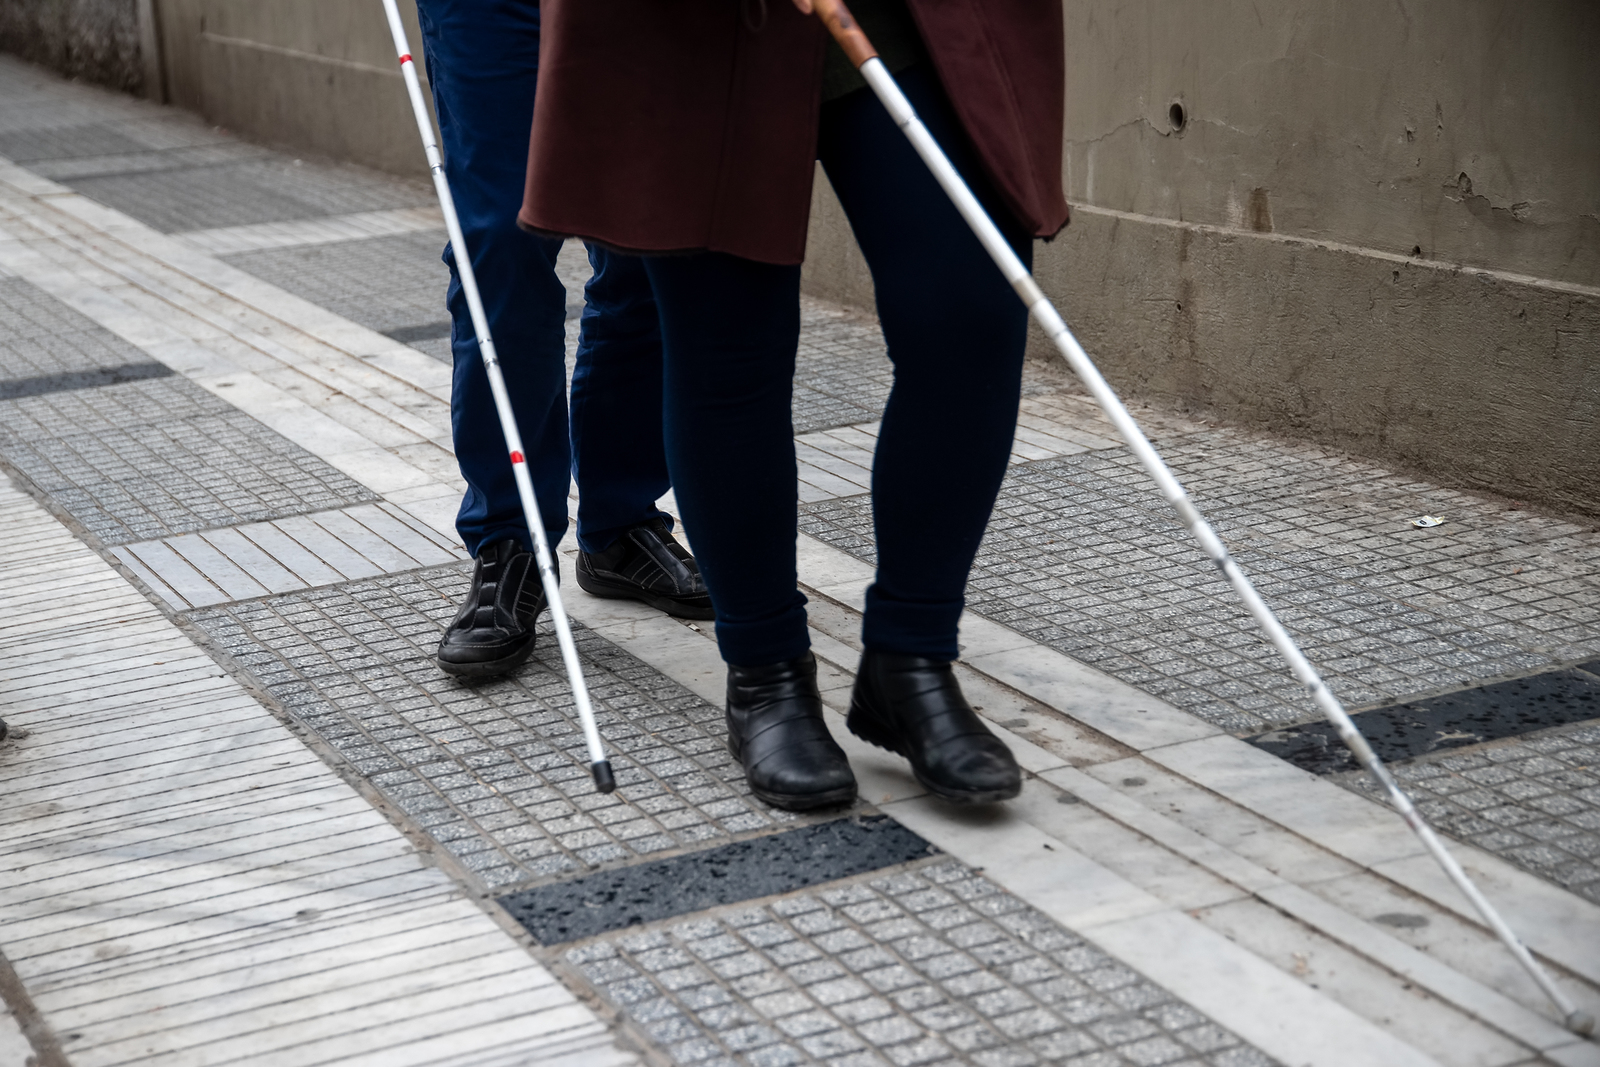 A blind man and woman walking together, both are using white mobility canes.